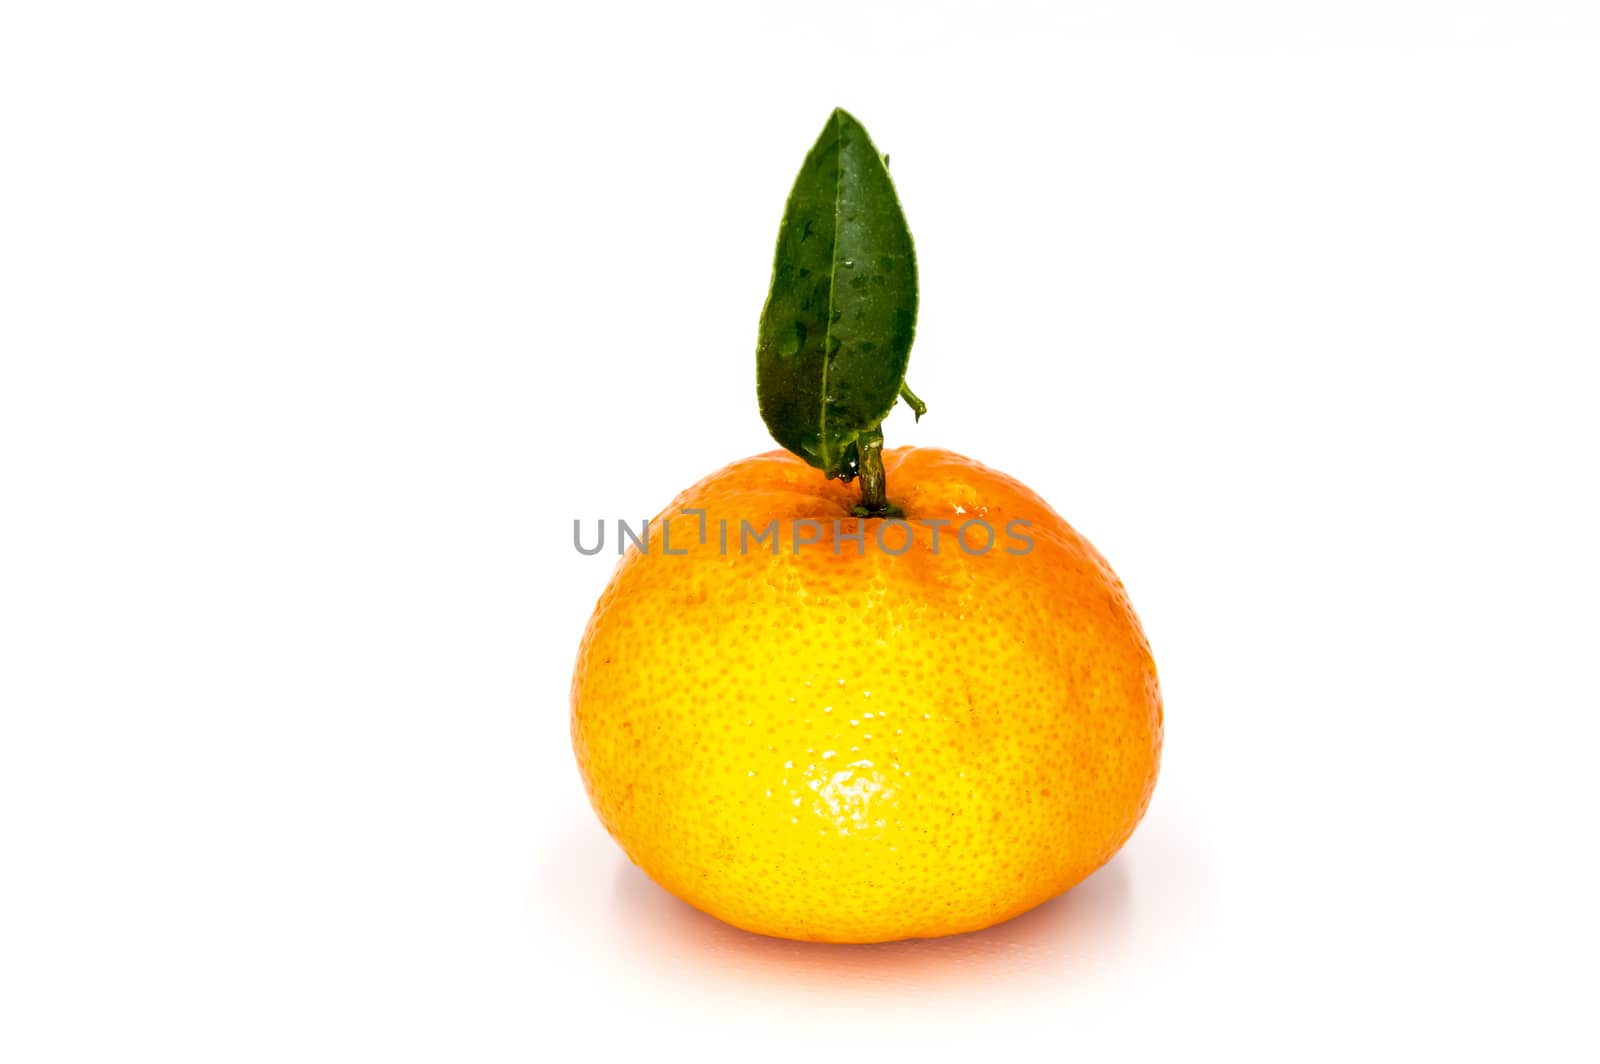 Ripe tangerine with leaves close-up on white background. Tangerine orange with leaves on white background.